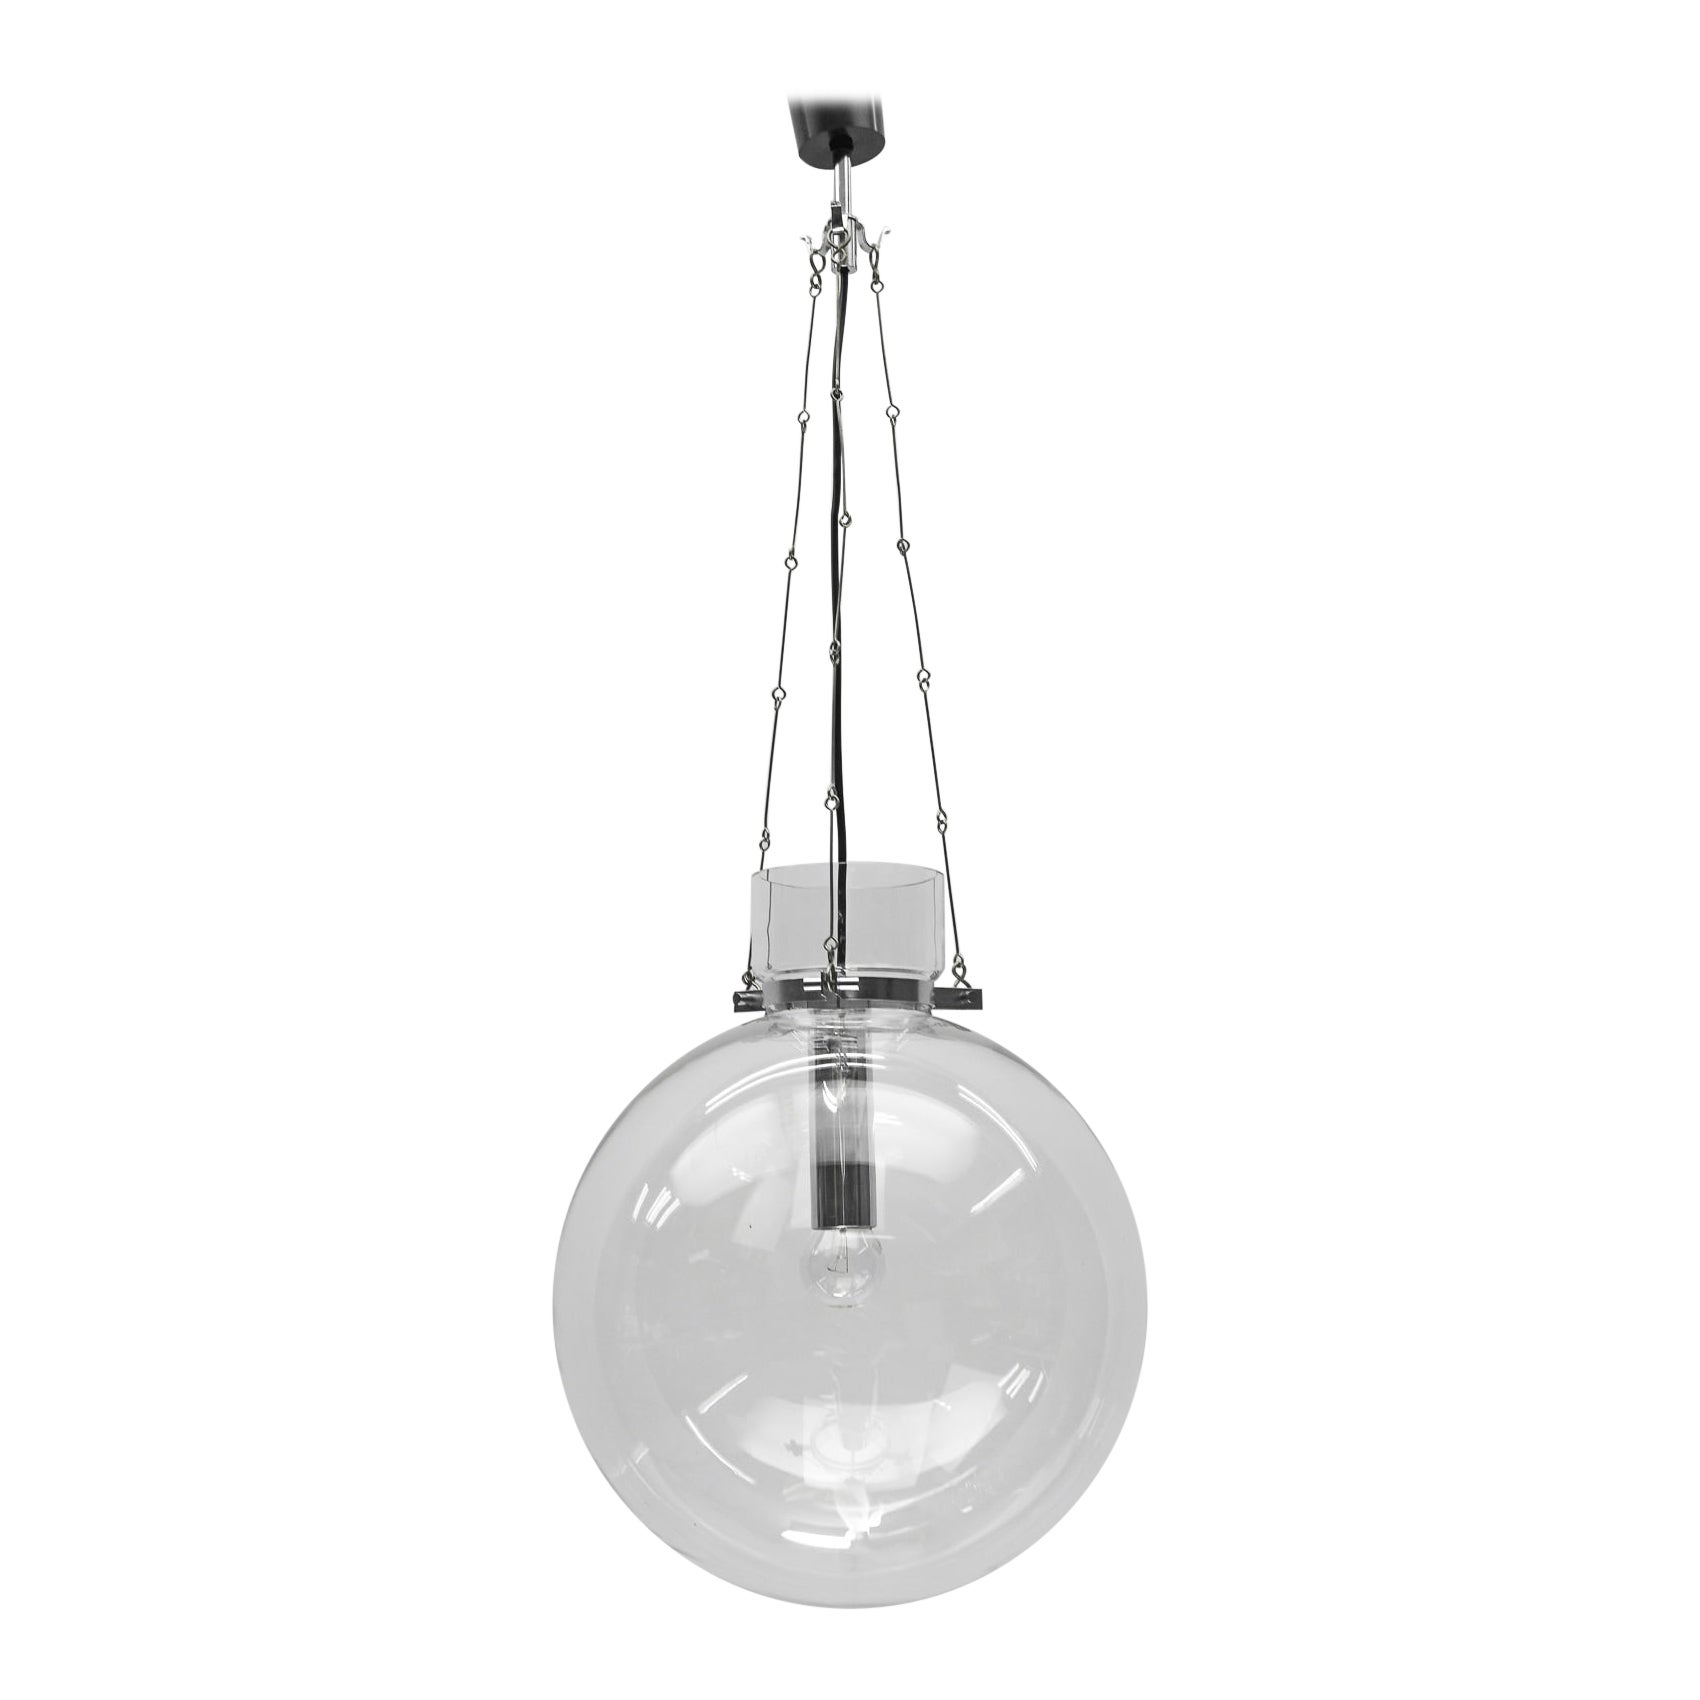 Exceptional & Large Mid Century Modern Glass Pendant Lamp, 1960s For Sale